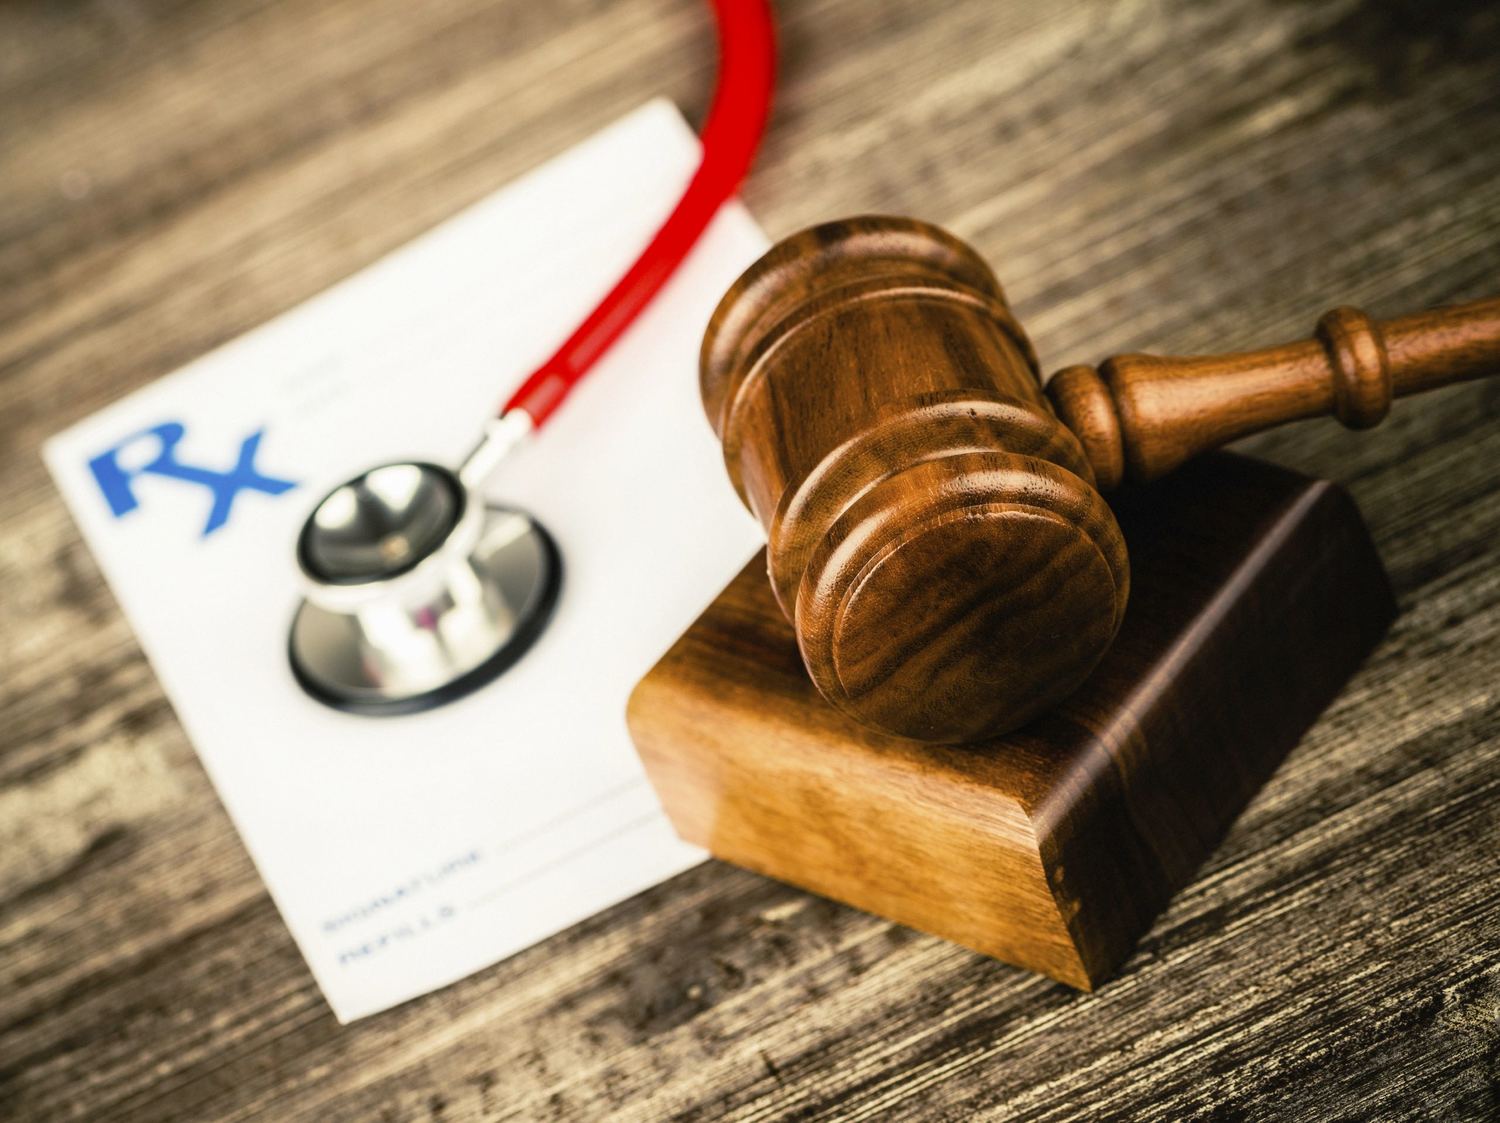 may require medical negligence lawyers